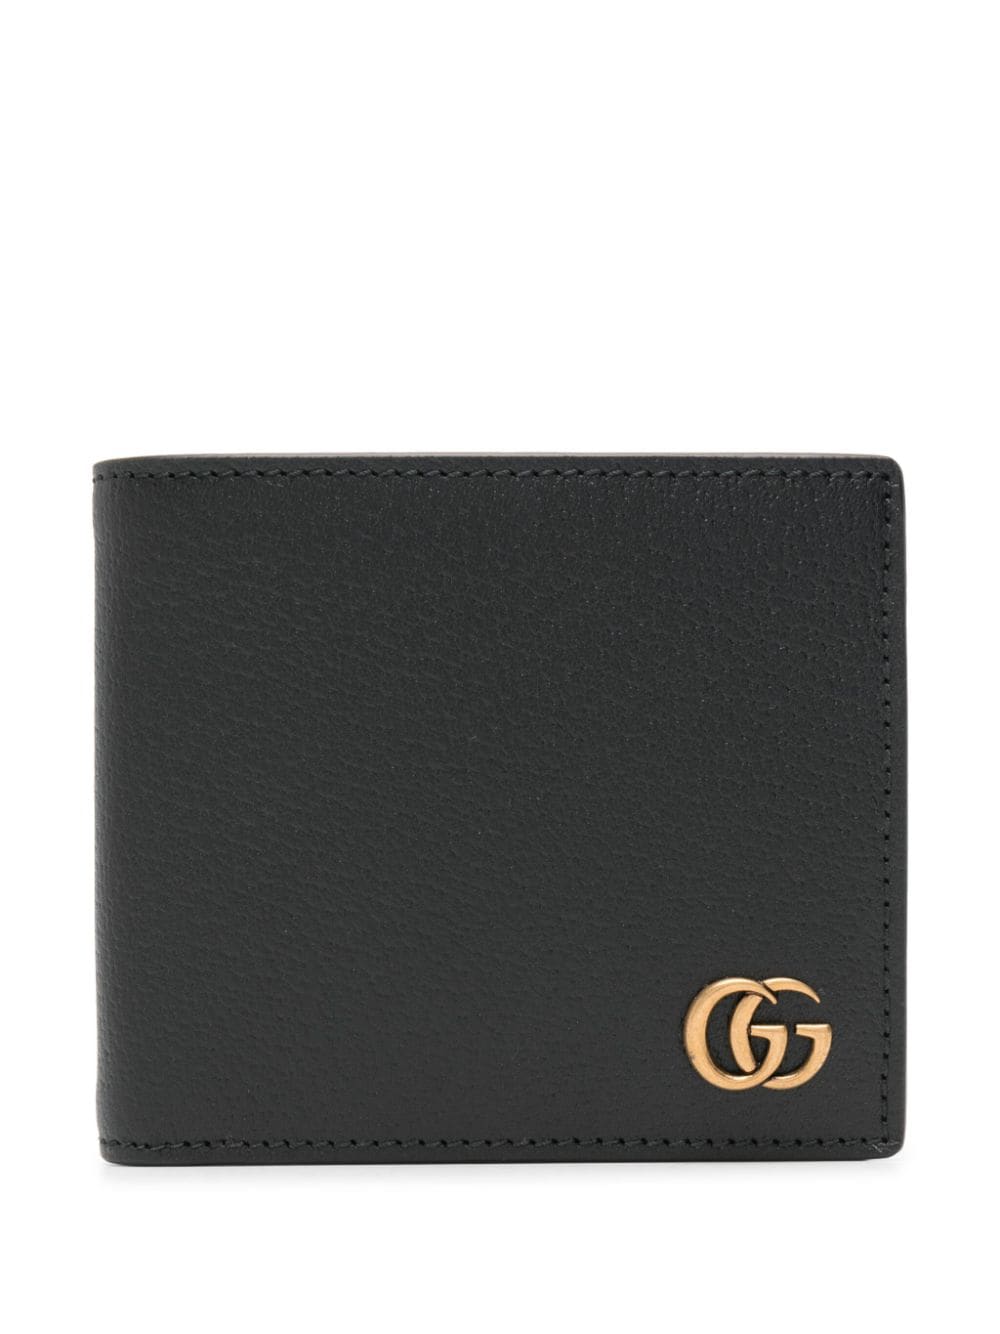 Gucci Gg Marmont 皮质钱包 In Black